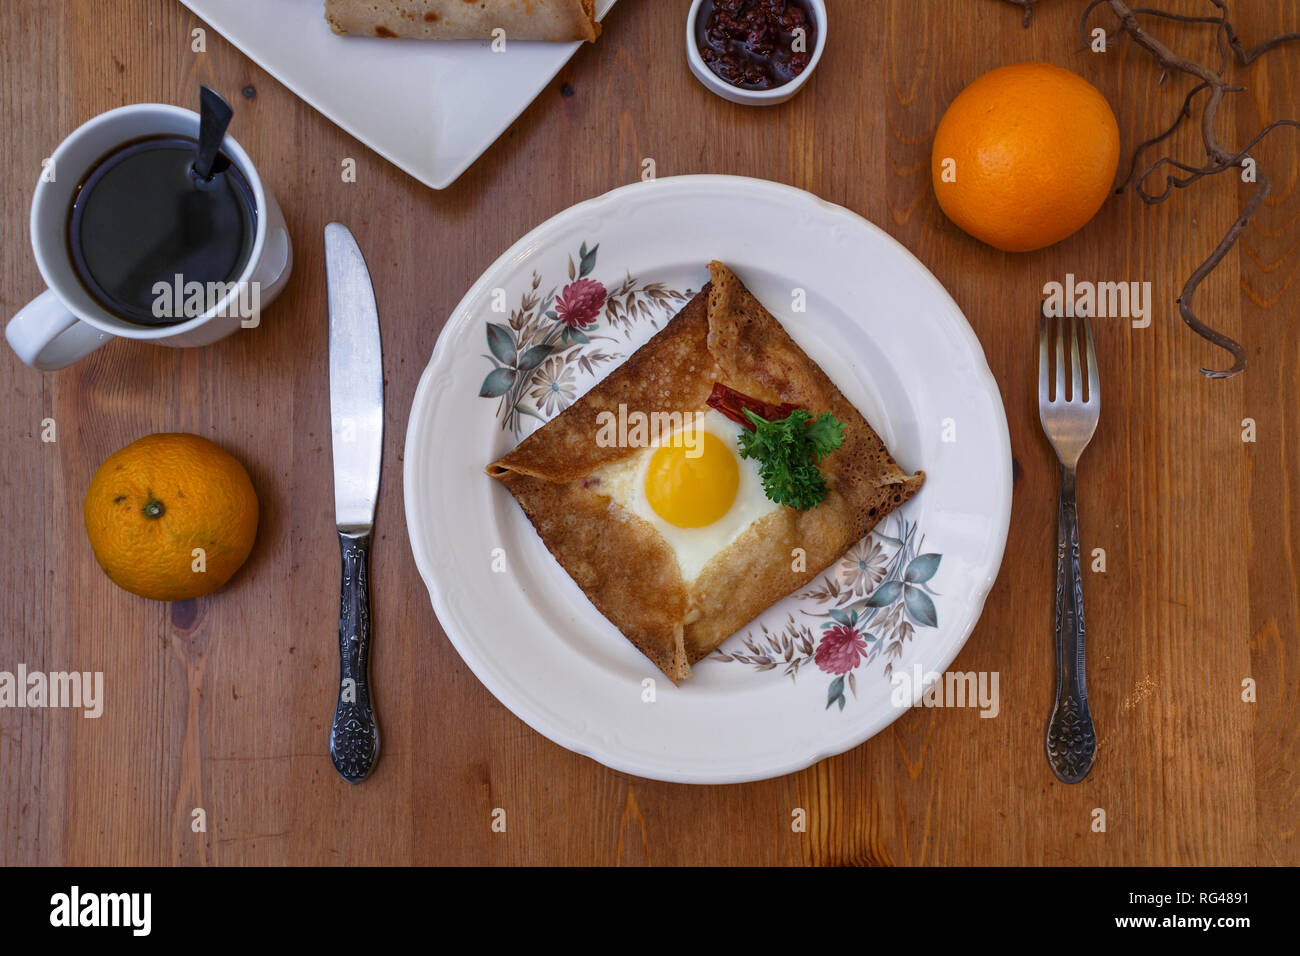 Galette sarrasin, buckwheat crepe, with ham cheese and egg, french brittany cuisine Stock Photo